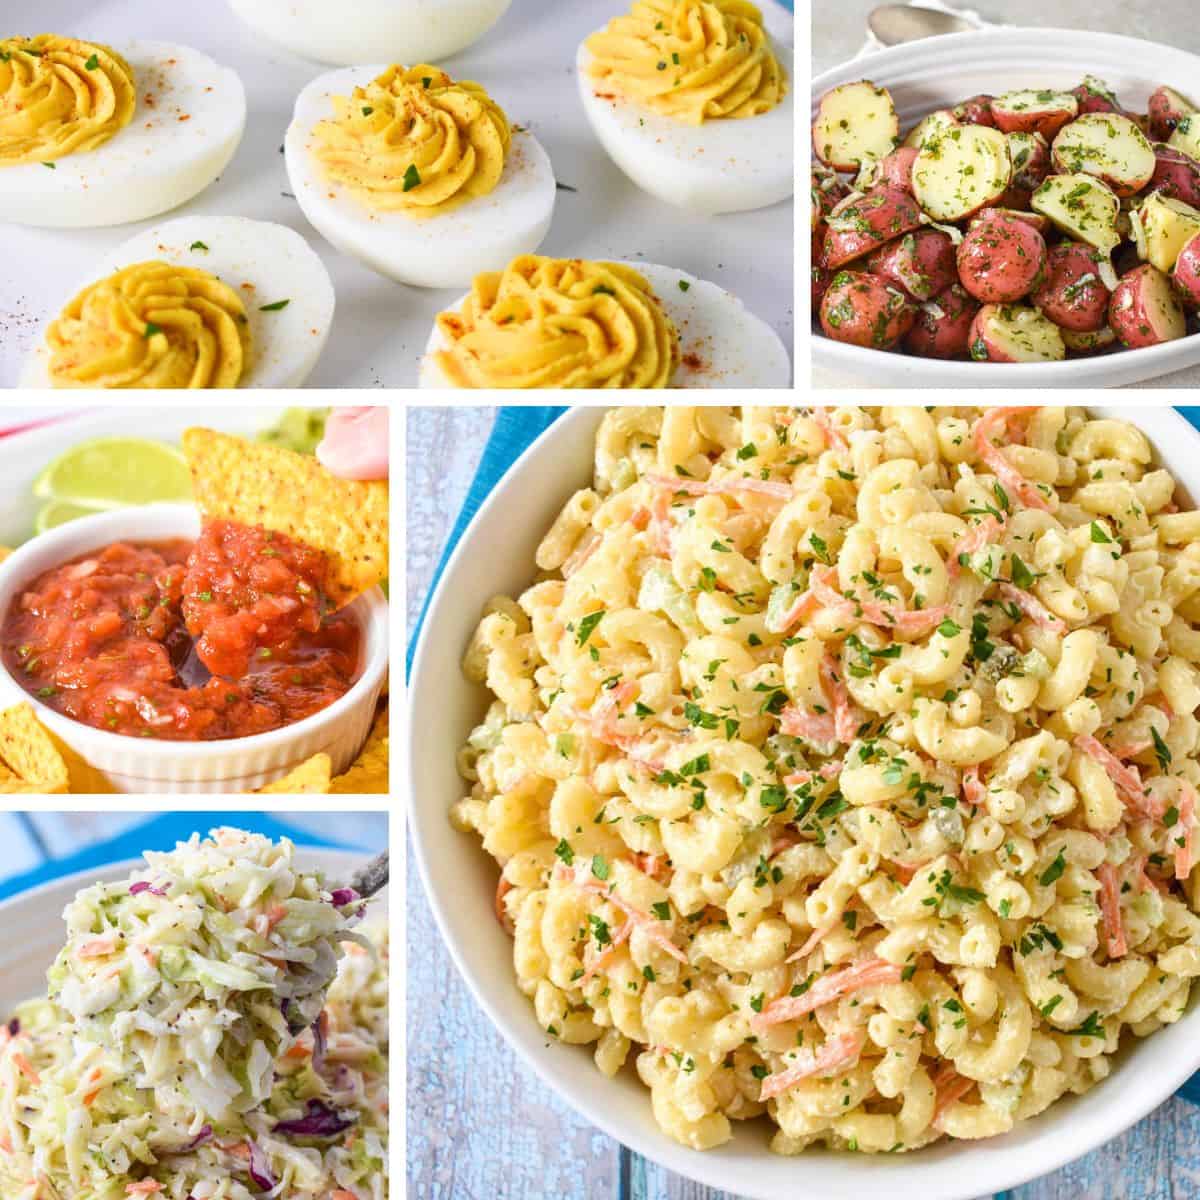 A collage of five pictures featured in the recipe collection: deviled eggs, chimichurri potatoes, salsa, coleslaw, and macaroni salad.